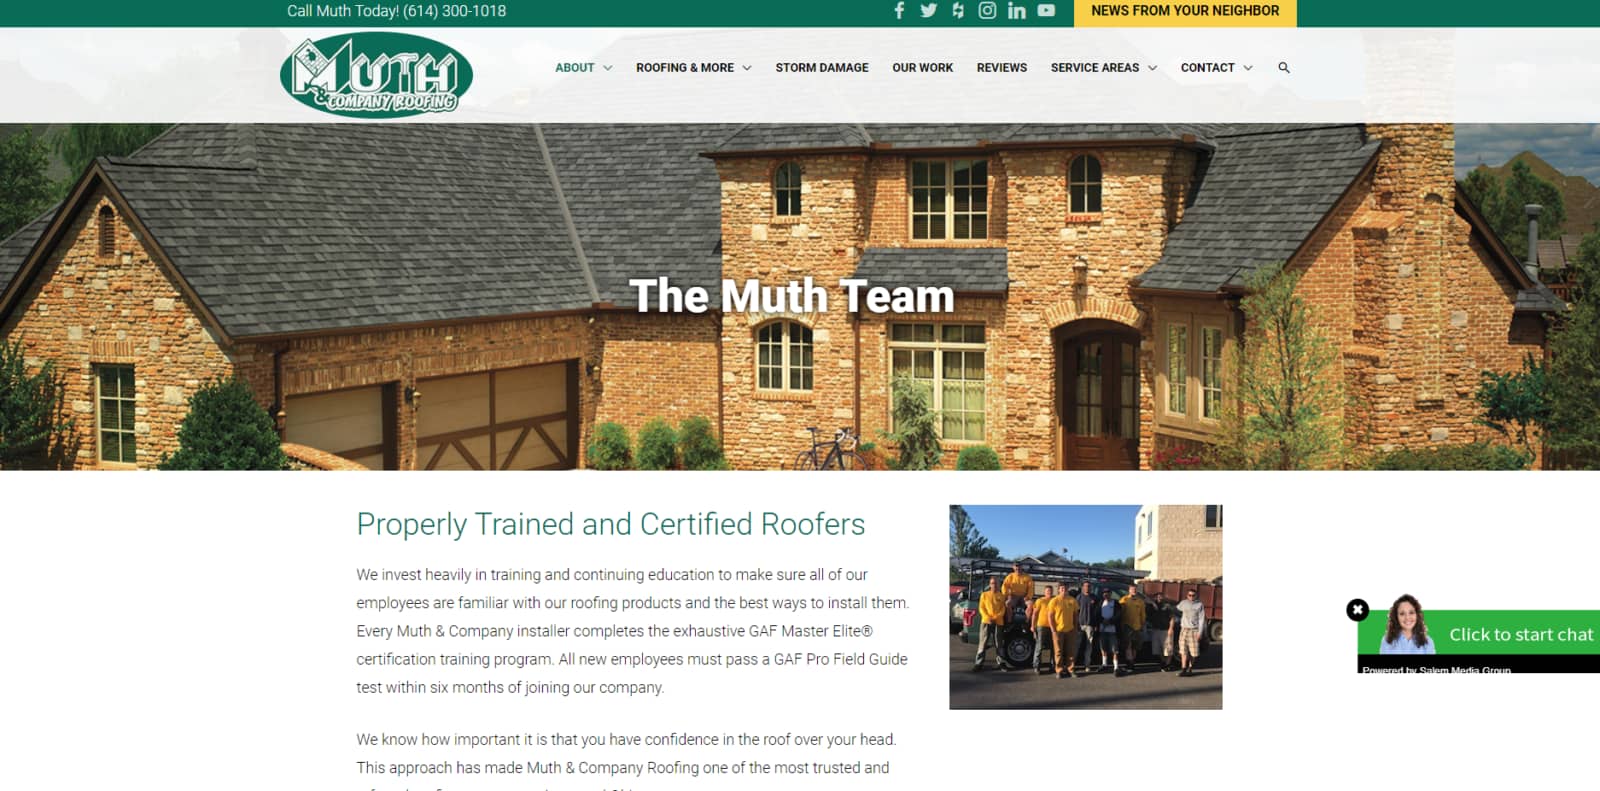 wordpress design and build muth & company our team